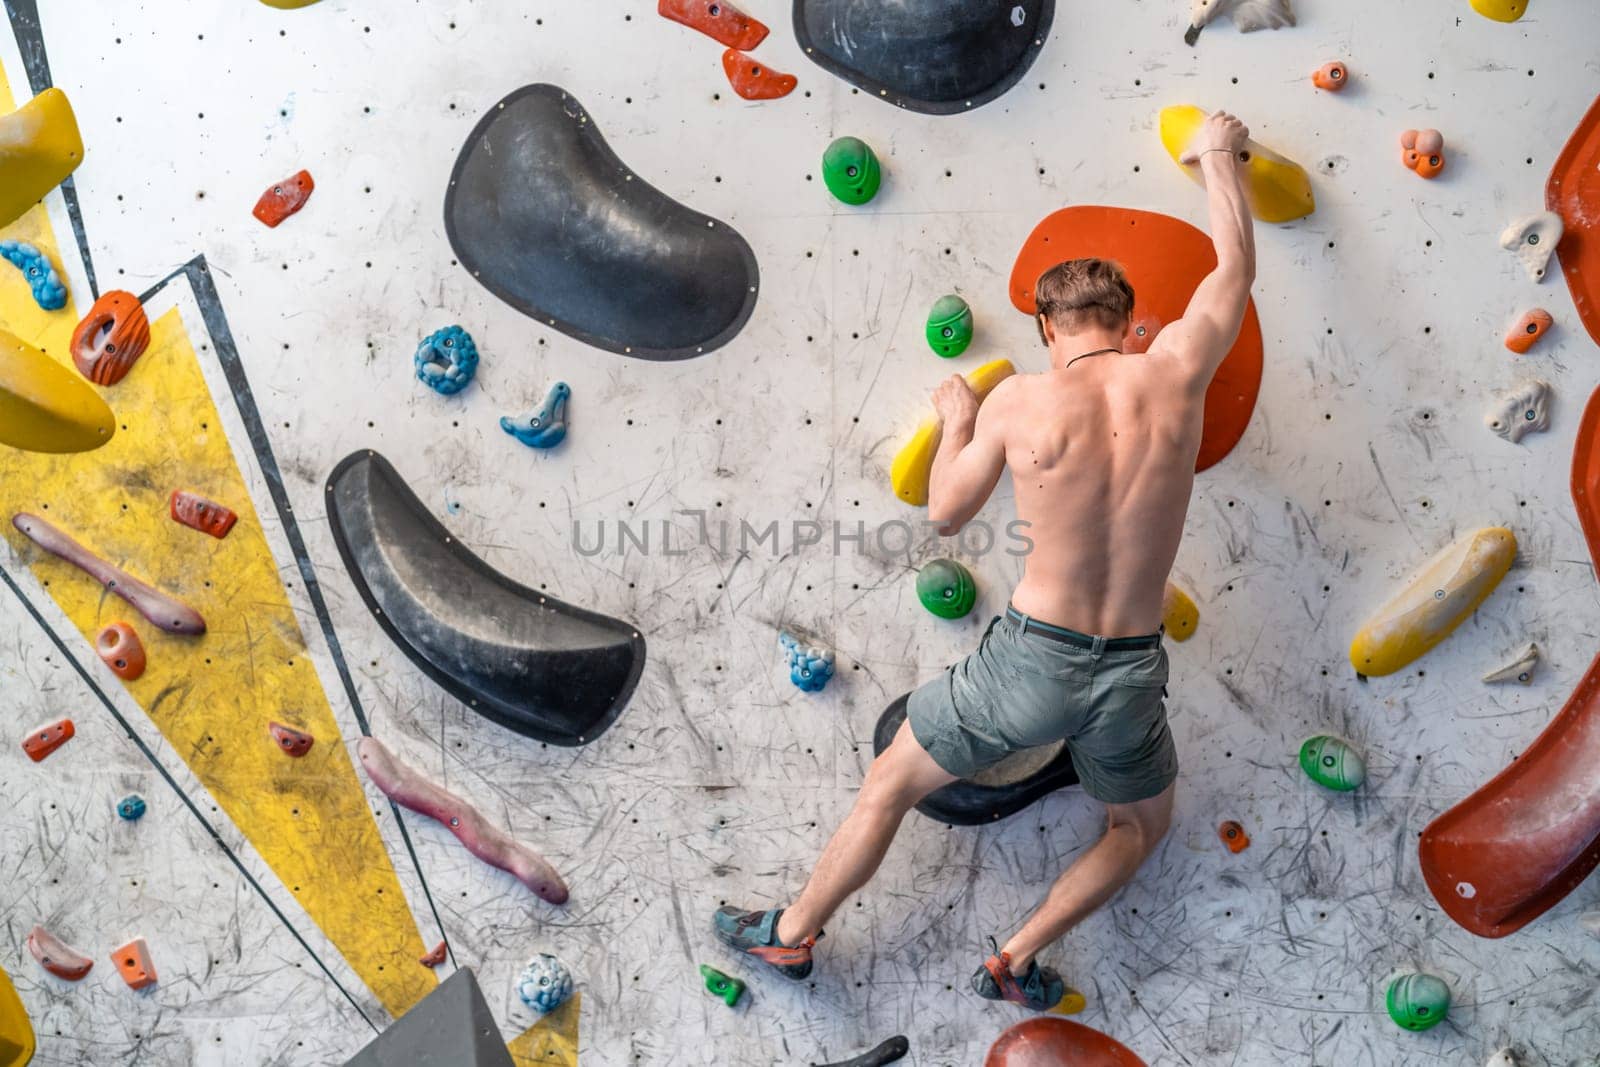 bouldering on an artificial climbing wall by Edophoto